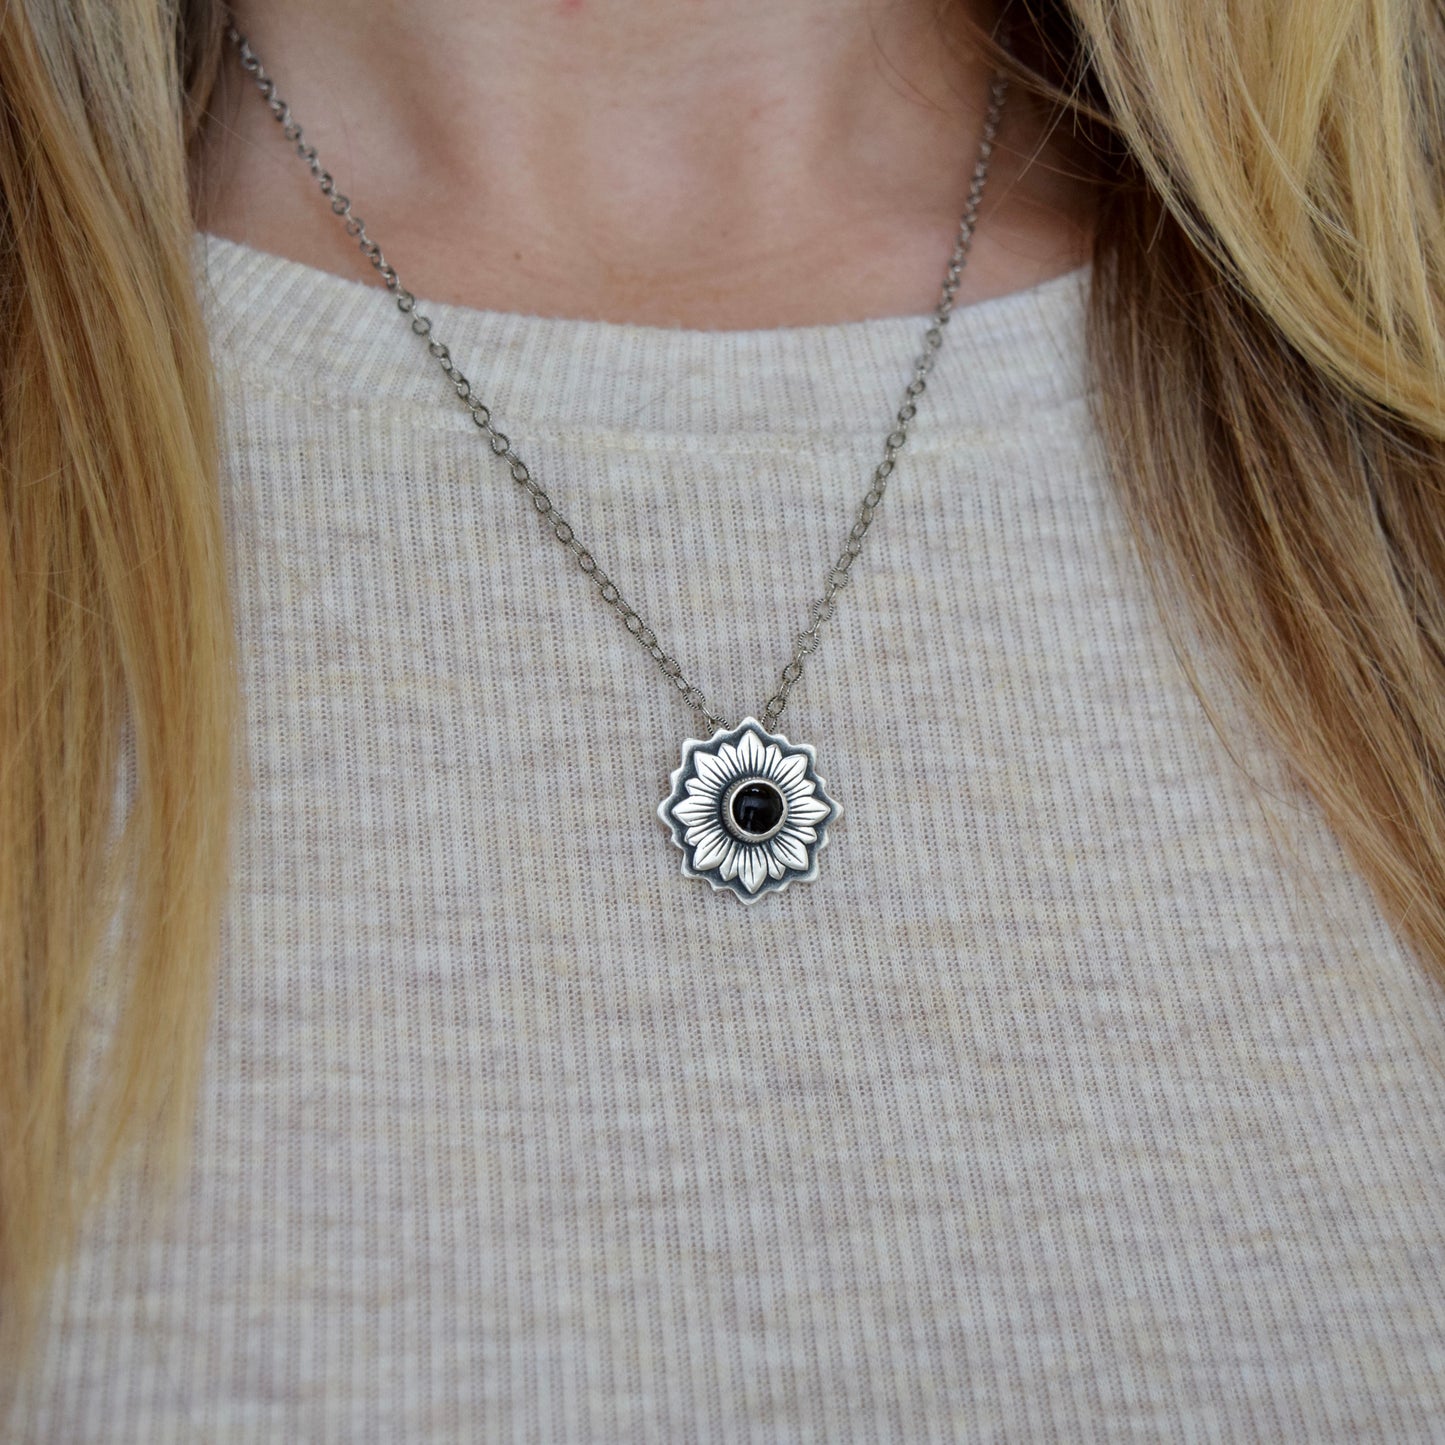 Sunflower Necklace with Black Onyx